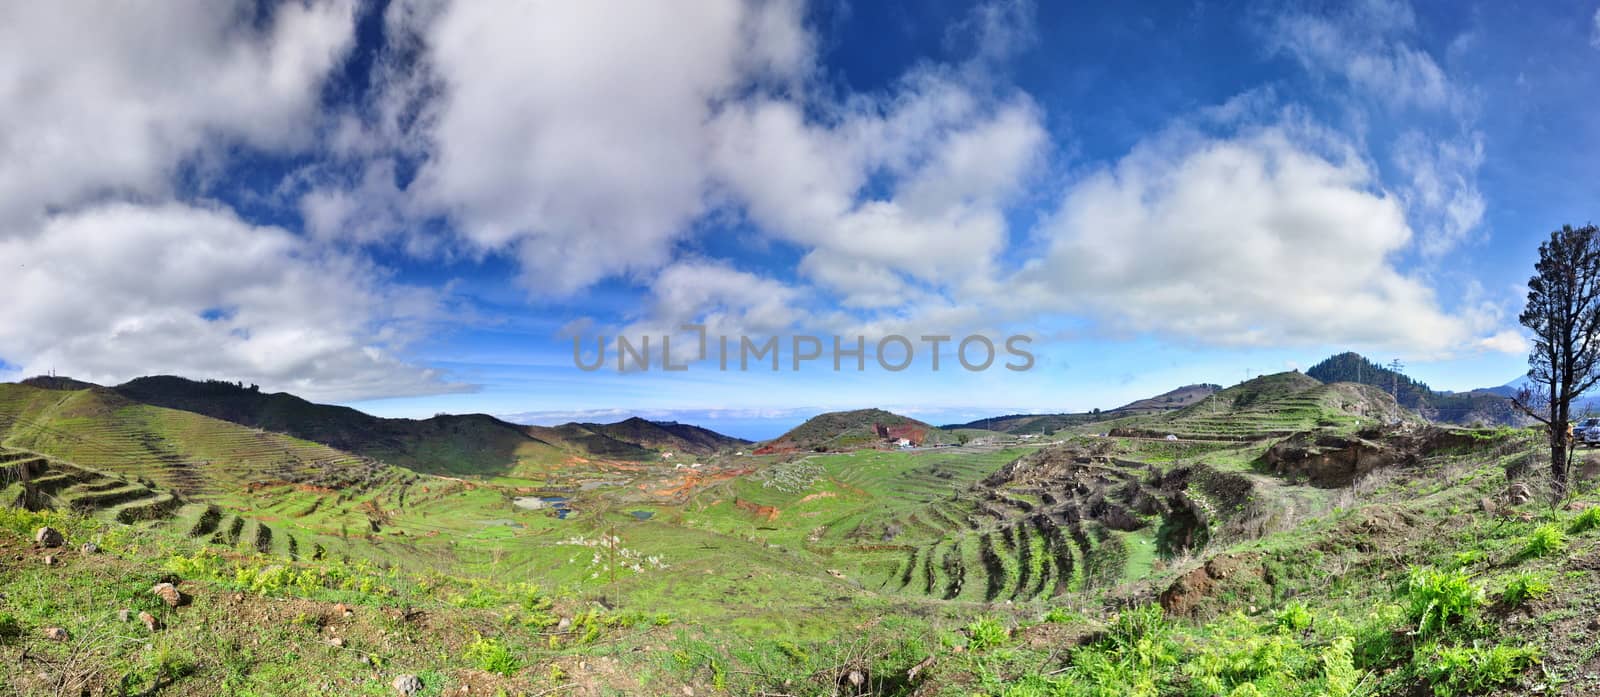 Green hills with blue sky on mountain plateau, Panorama, Tenerife, Canarian Islands by Eagle2308